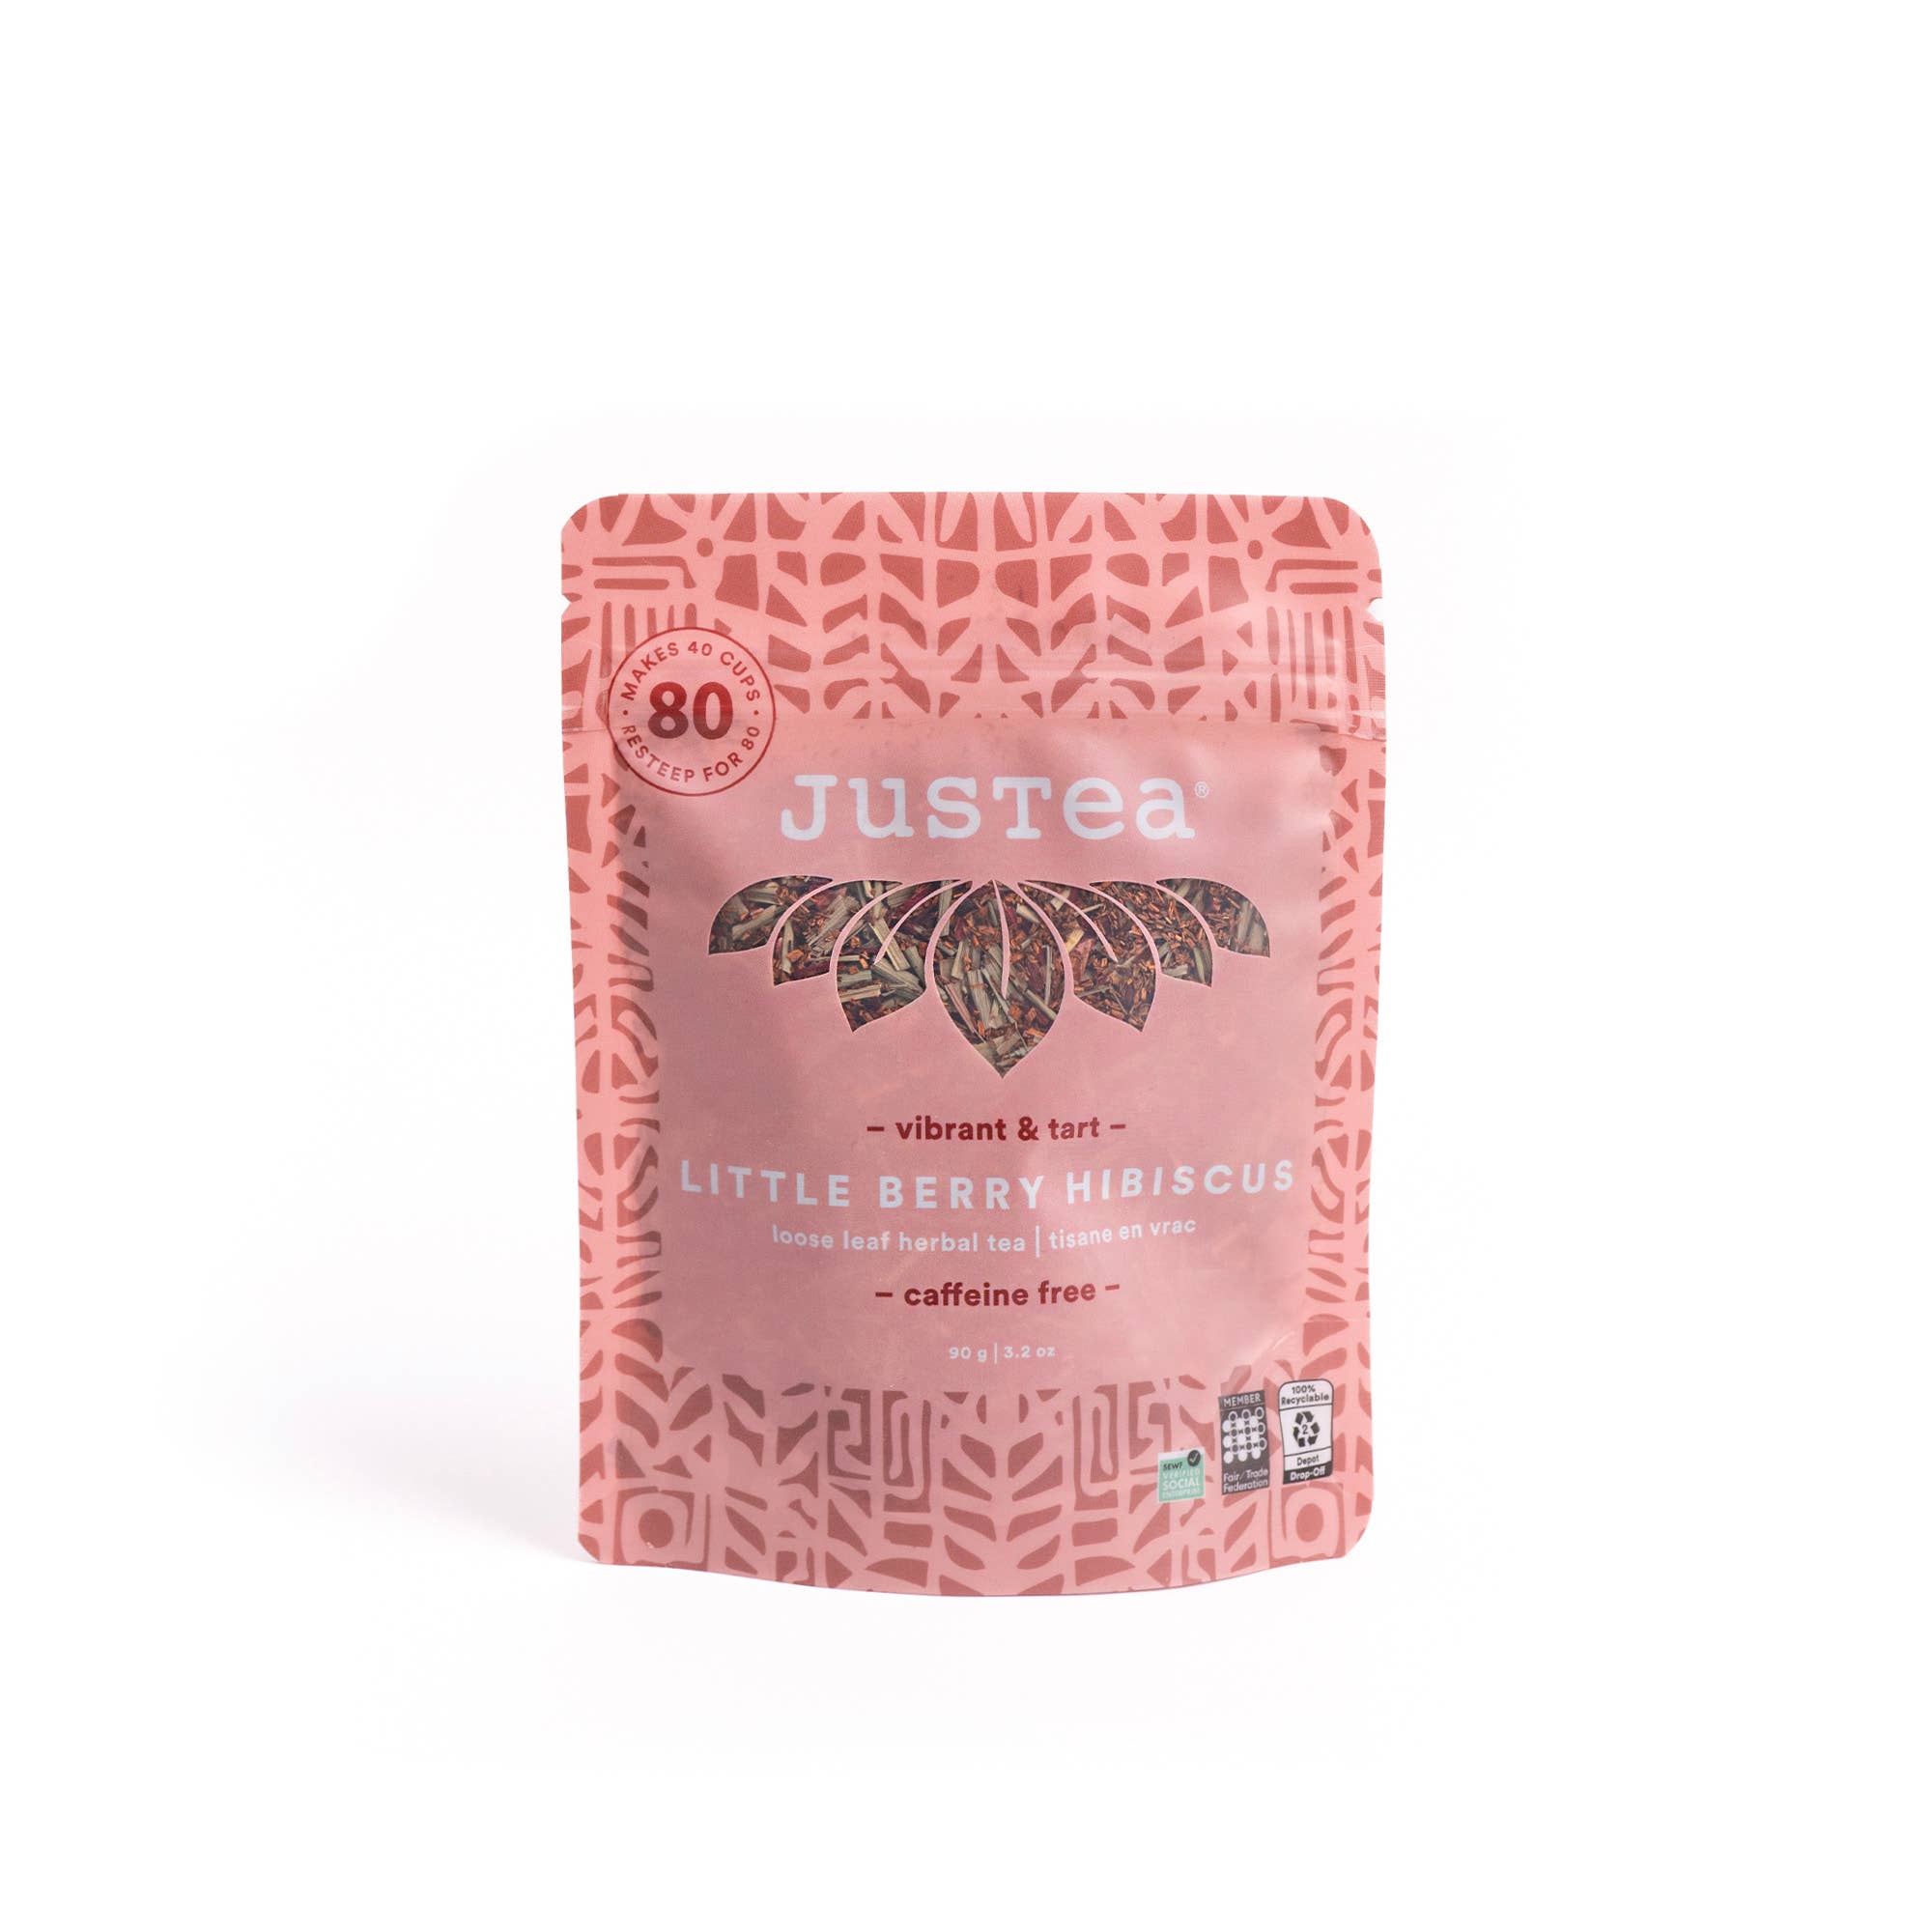 Little Berry Hibiscus Stand-up Pouch - Fair-Trade Herbal Tea